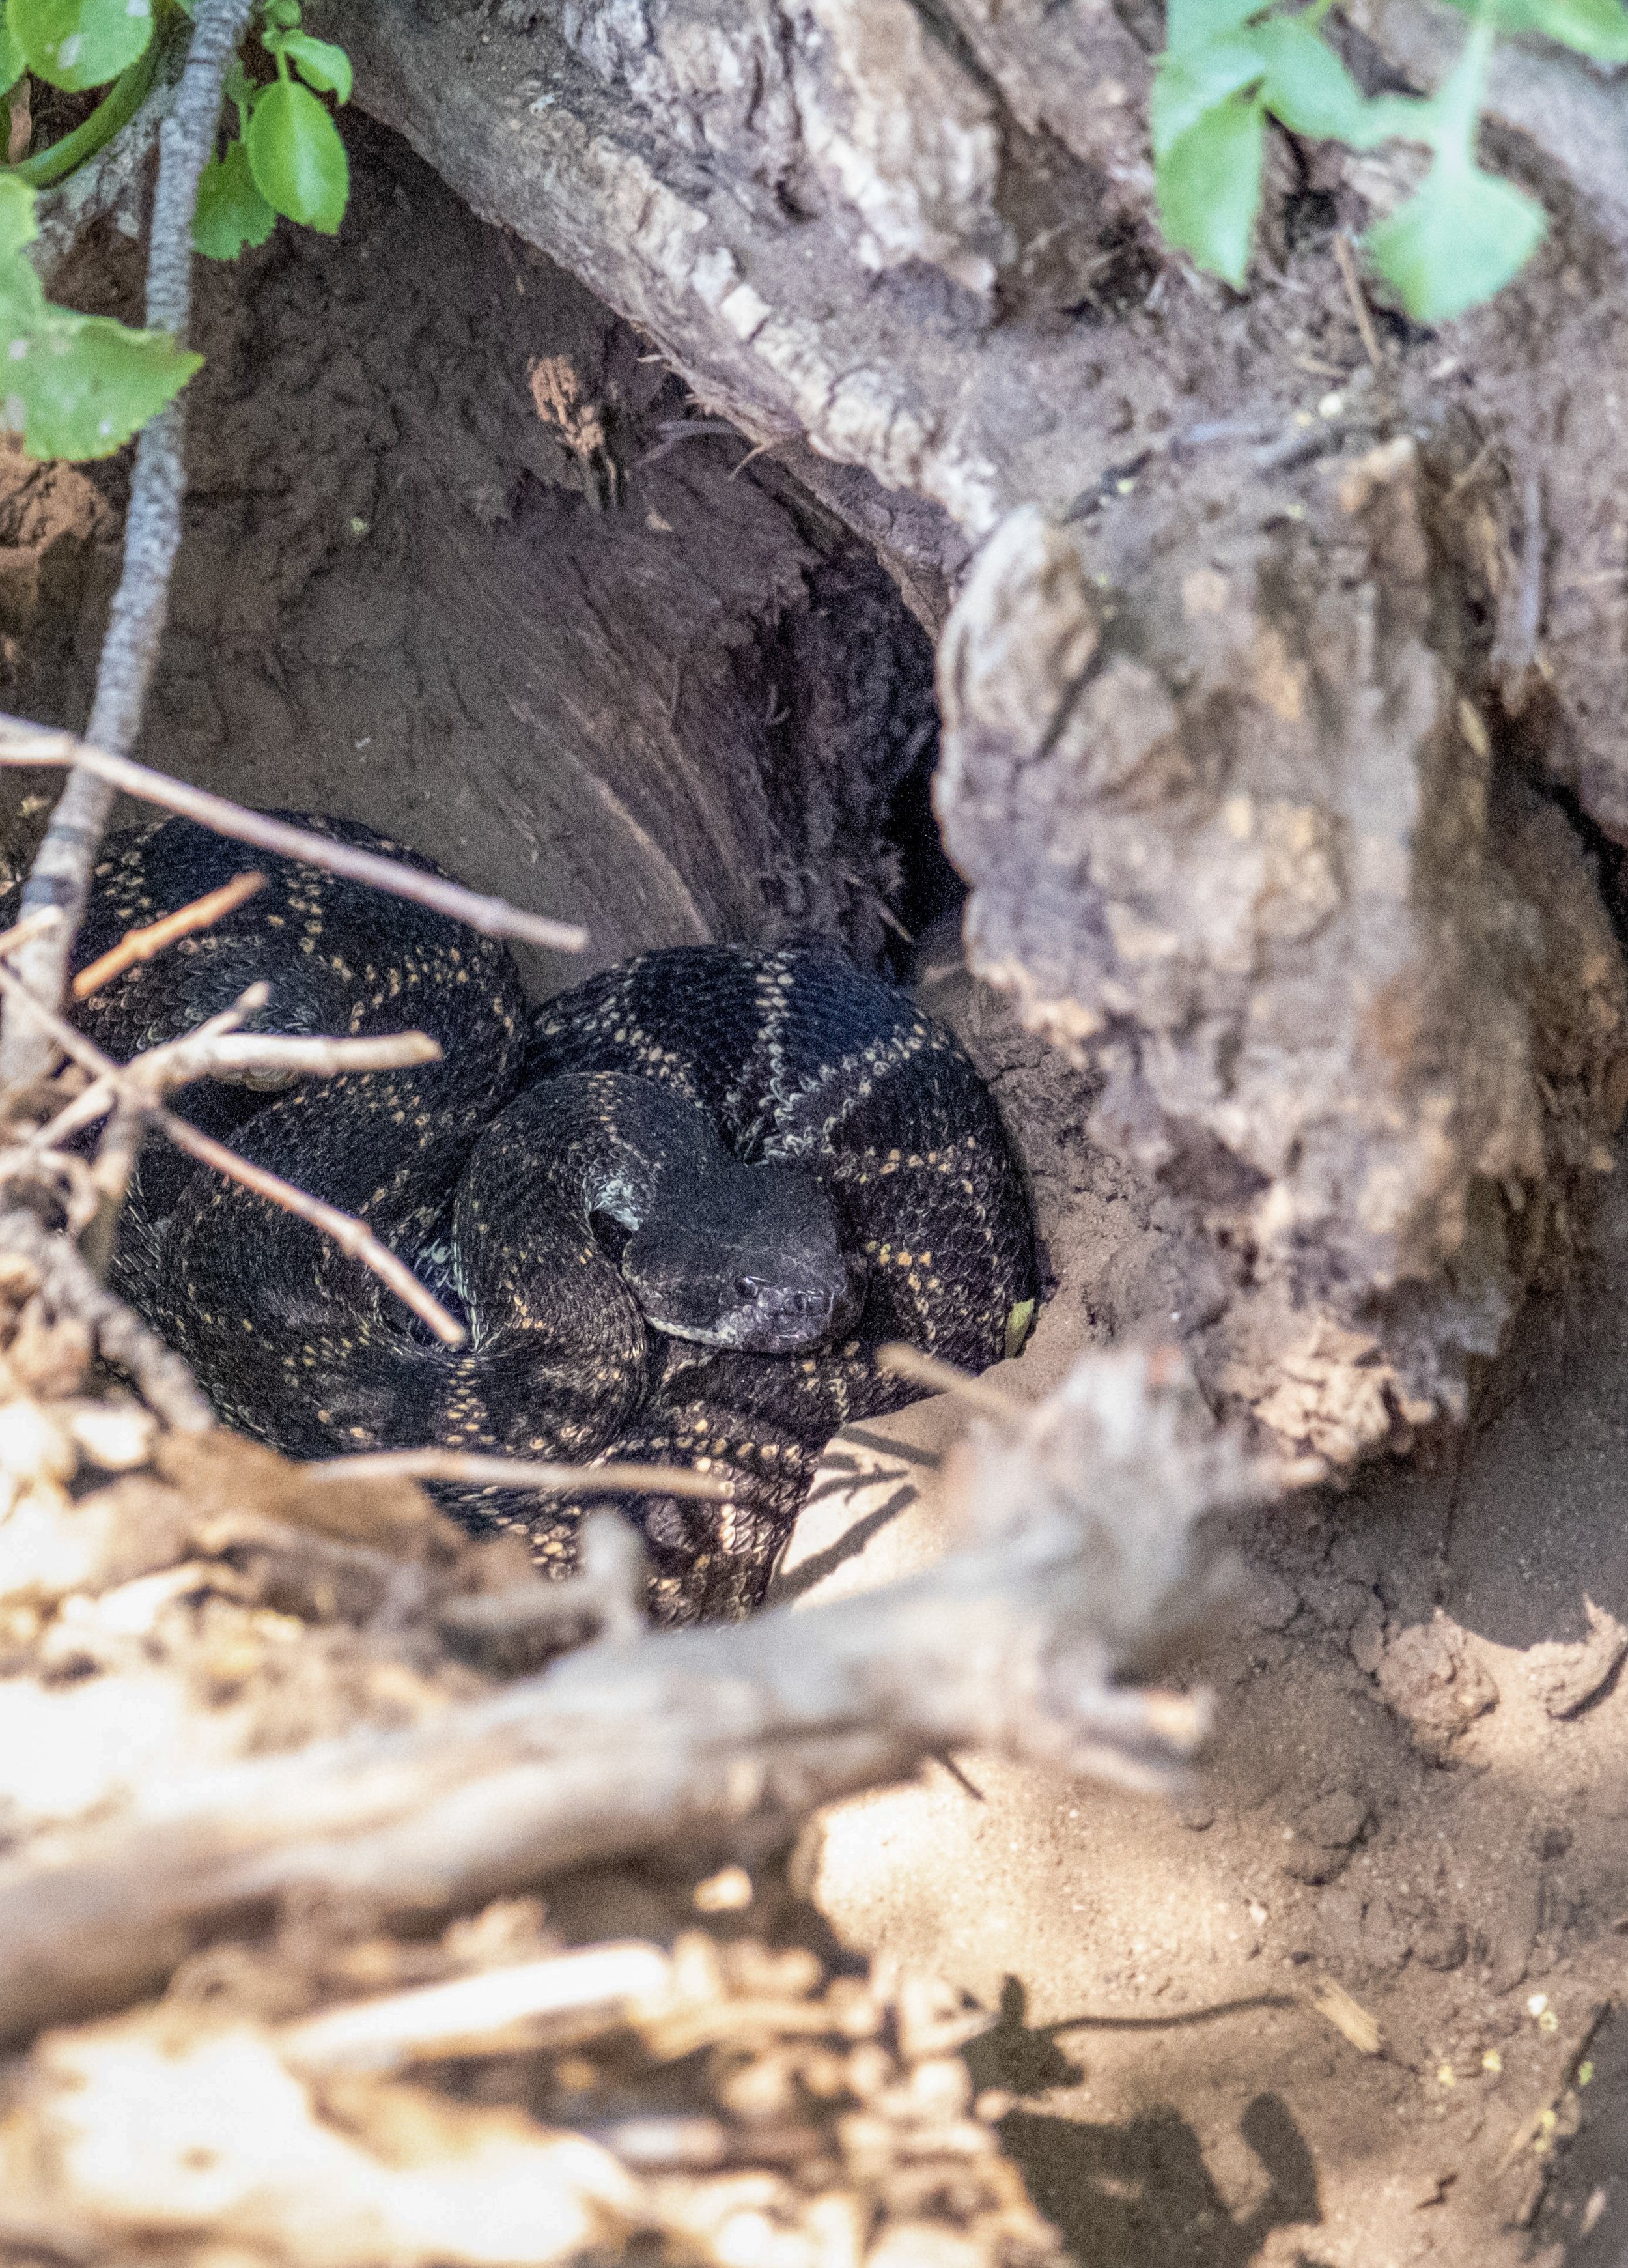  A Melanistic Diamondback Rattlesnake, coiled in a hole at the base of a tree at Stoney Point Park in Chatsworth, Los Angeles, California on Saturday, April 9, 2022. (Anna Sophia Moltke | The Corsair) 